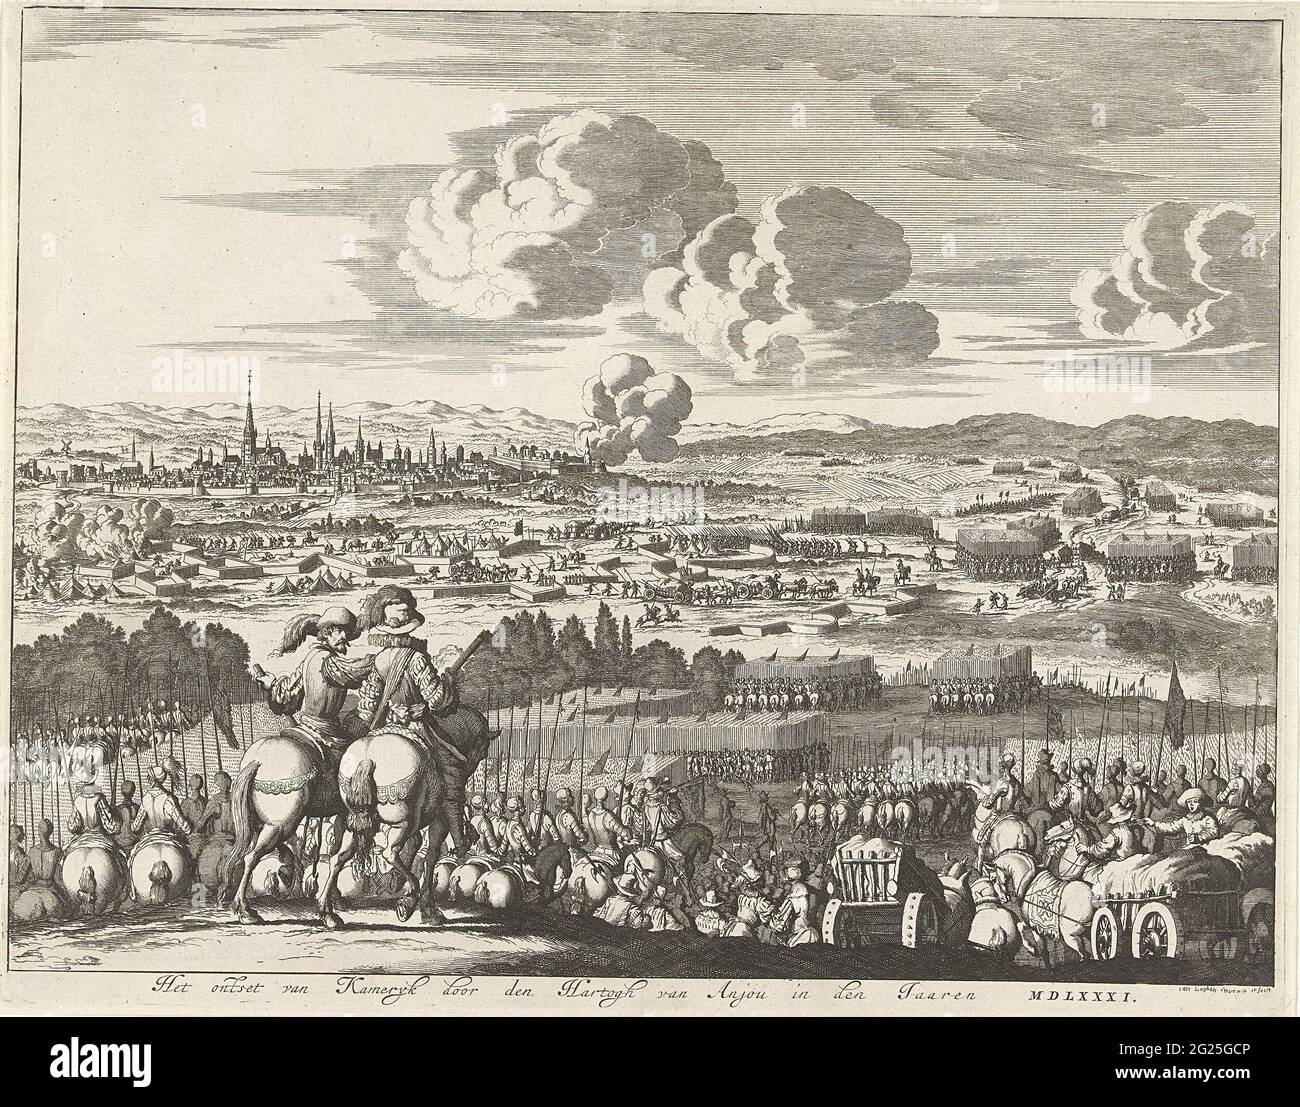 De Dreden van Kamerijk by the Duke of Anjou, 1581; The release of Komery by Den Hartogh from Anjou in the year's mdlxxxi. Kamerijk Besiemed by the Duke of Parma but relieved by the Duke of Anjou, August 16, 1581. View of the city from the position of the Army of Anjou, in the foreground on the left two places on horseback. The troops of Parma leave their statements around the city. Stock Photo